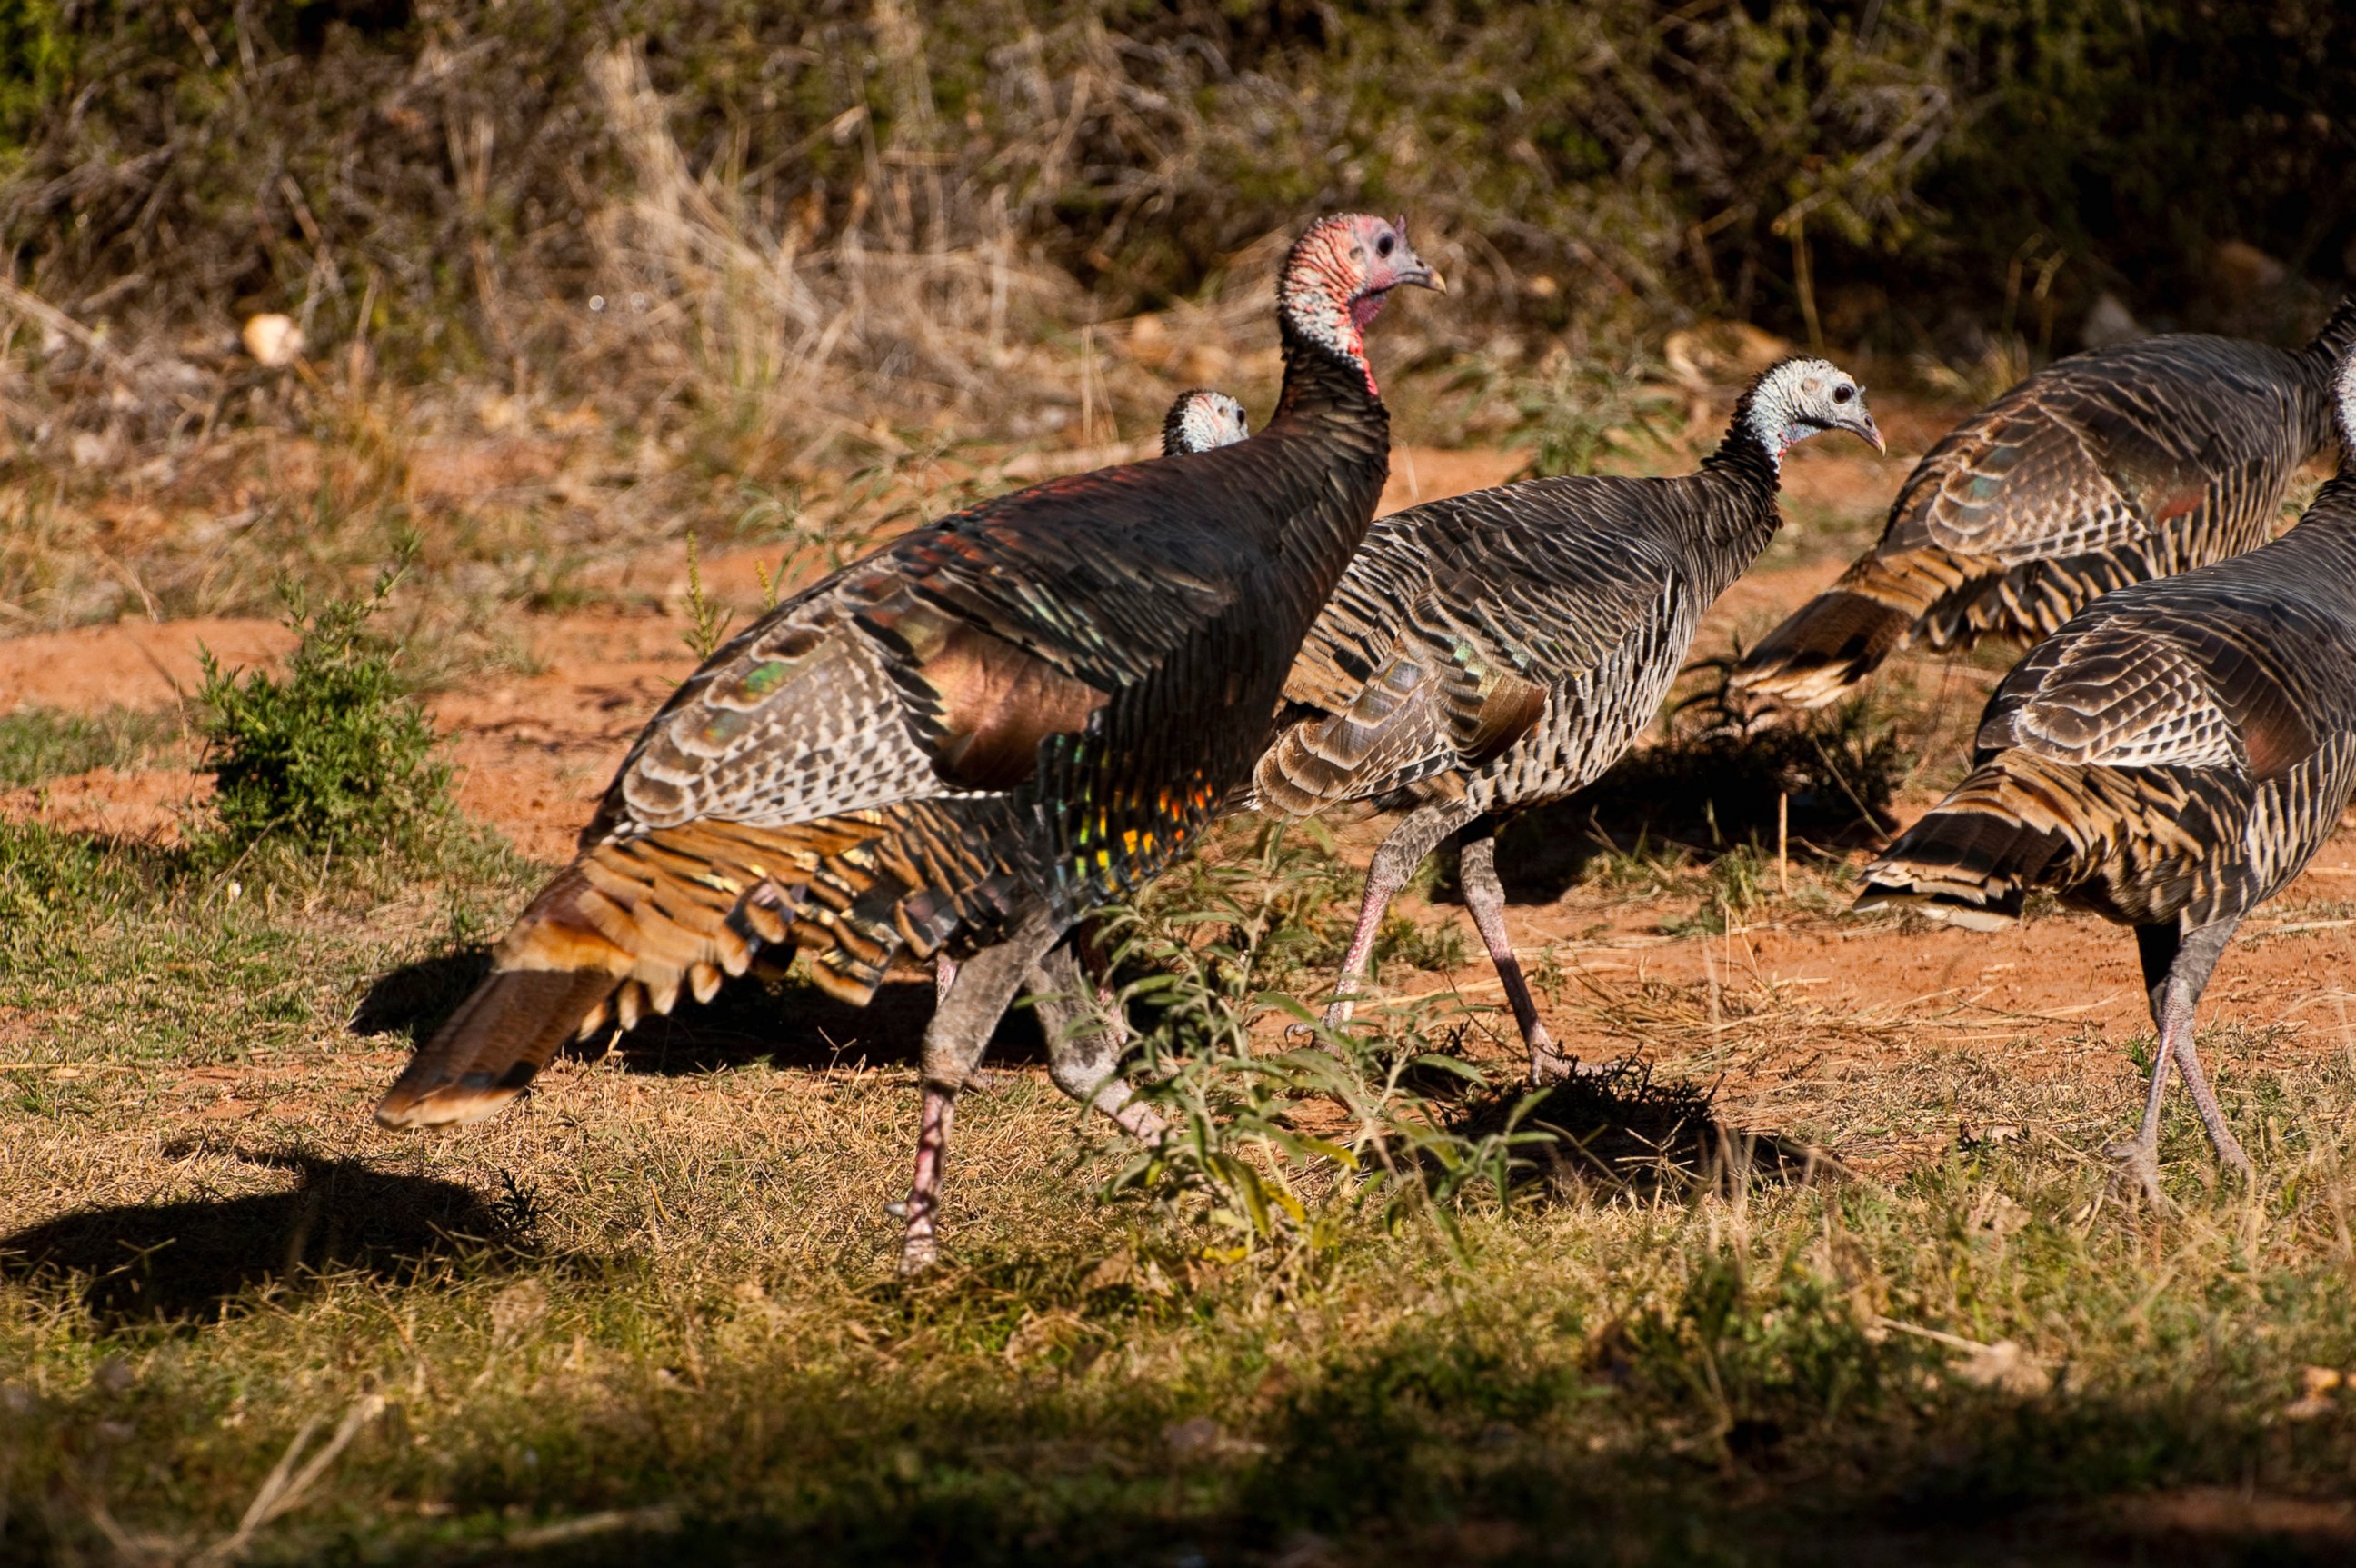 PHOTO: These wild turkeys are similar to what the pilgrims would have eaten.